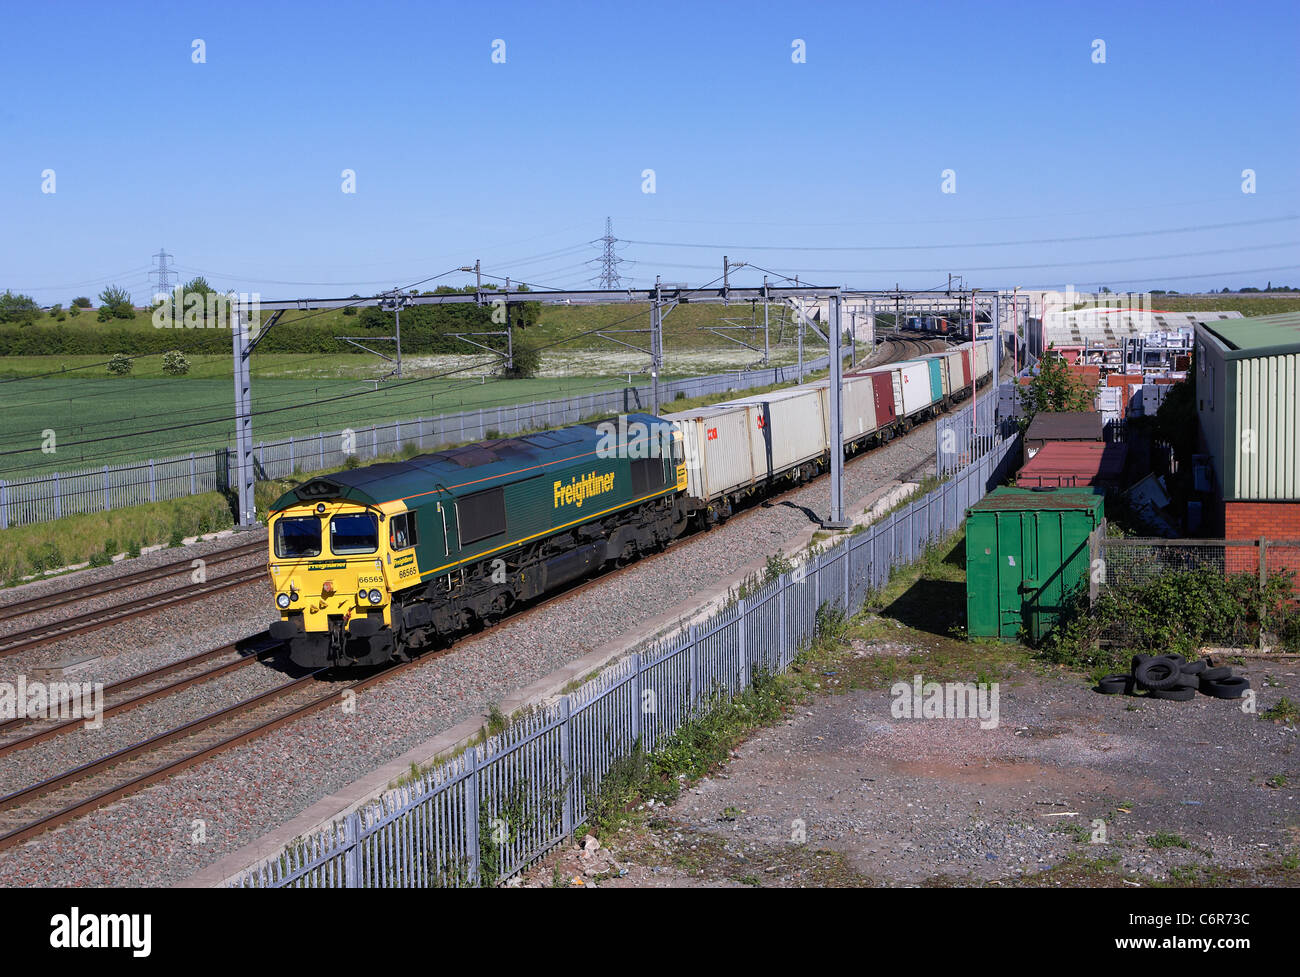 Freightliner 66565 heads  4M61 Southampton to Trafford Park intgermodal along the Trent Valley section on the WCML at Lichfield Stock Photo